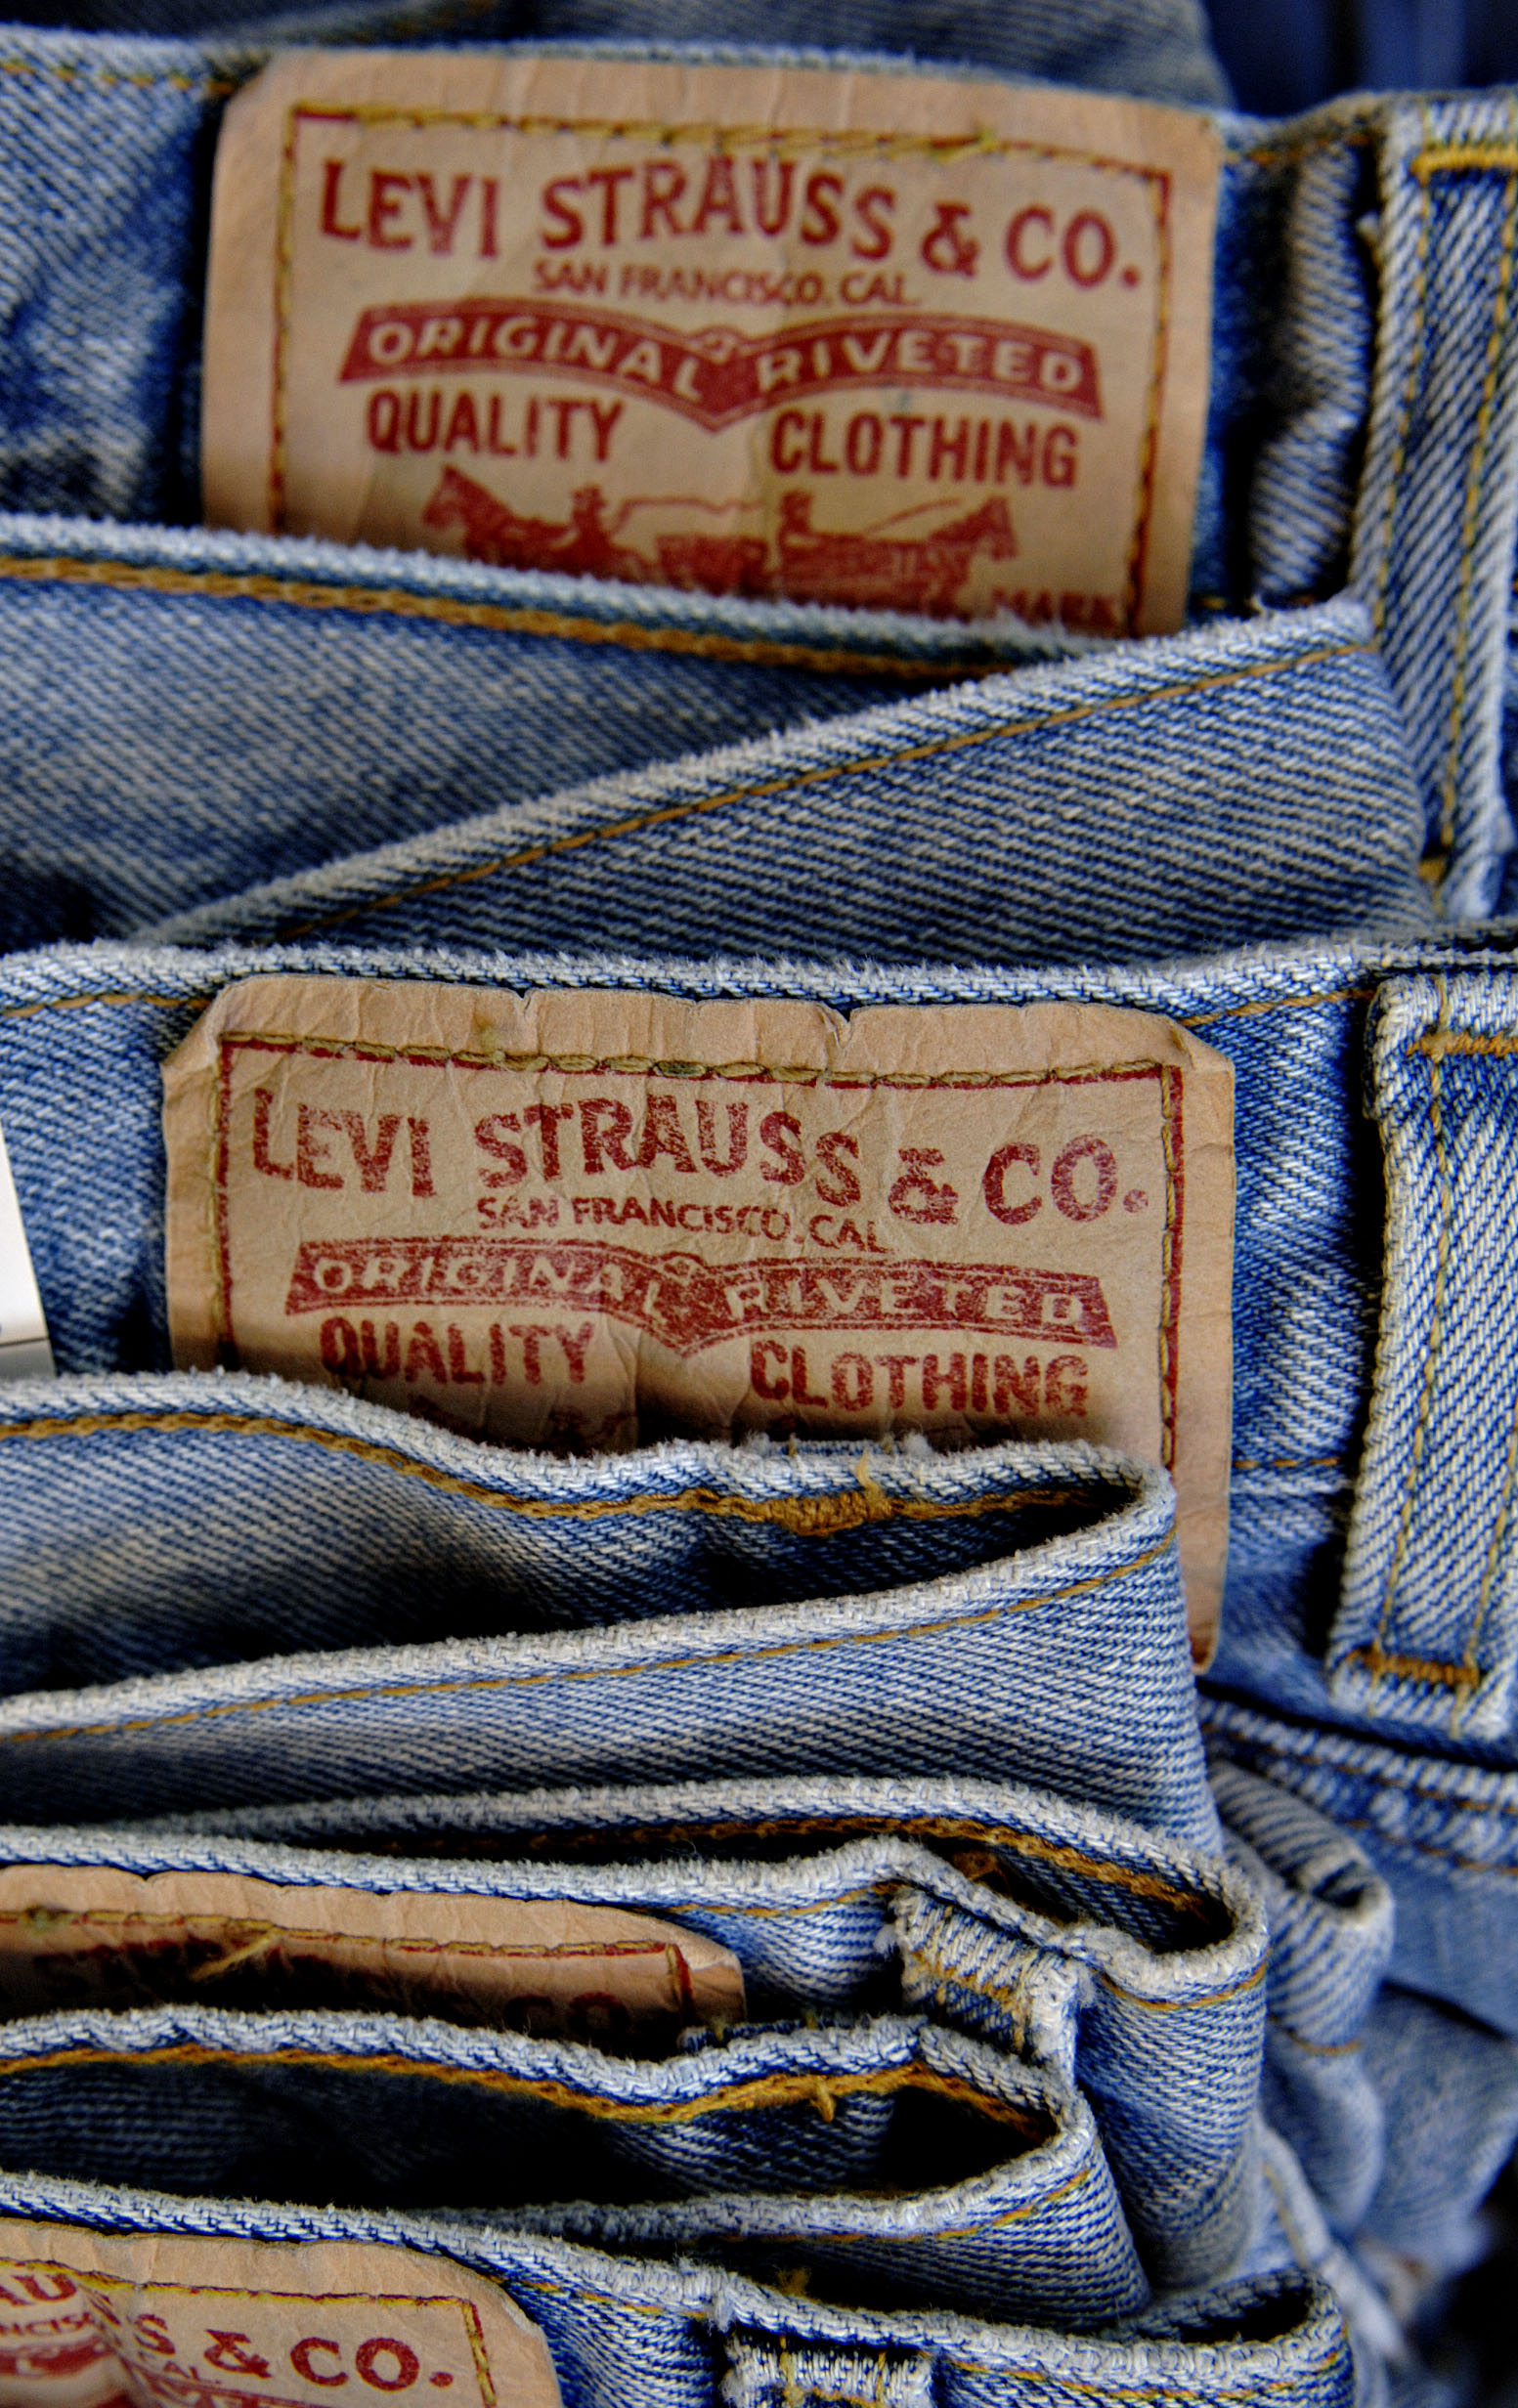 Levi Strauss jeans sit on display in a retail store in New York